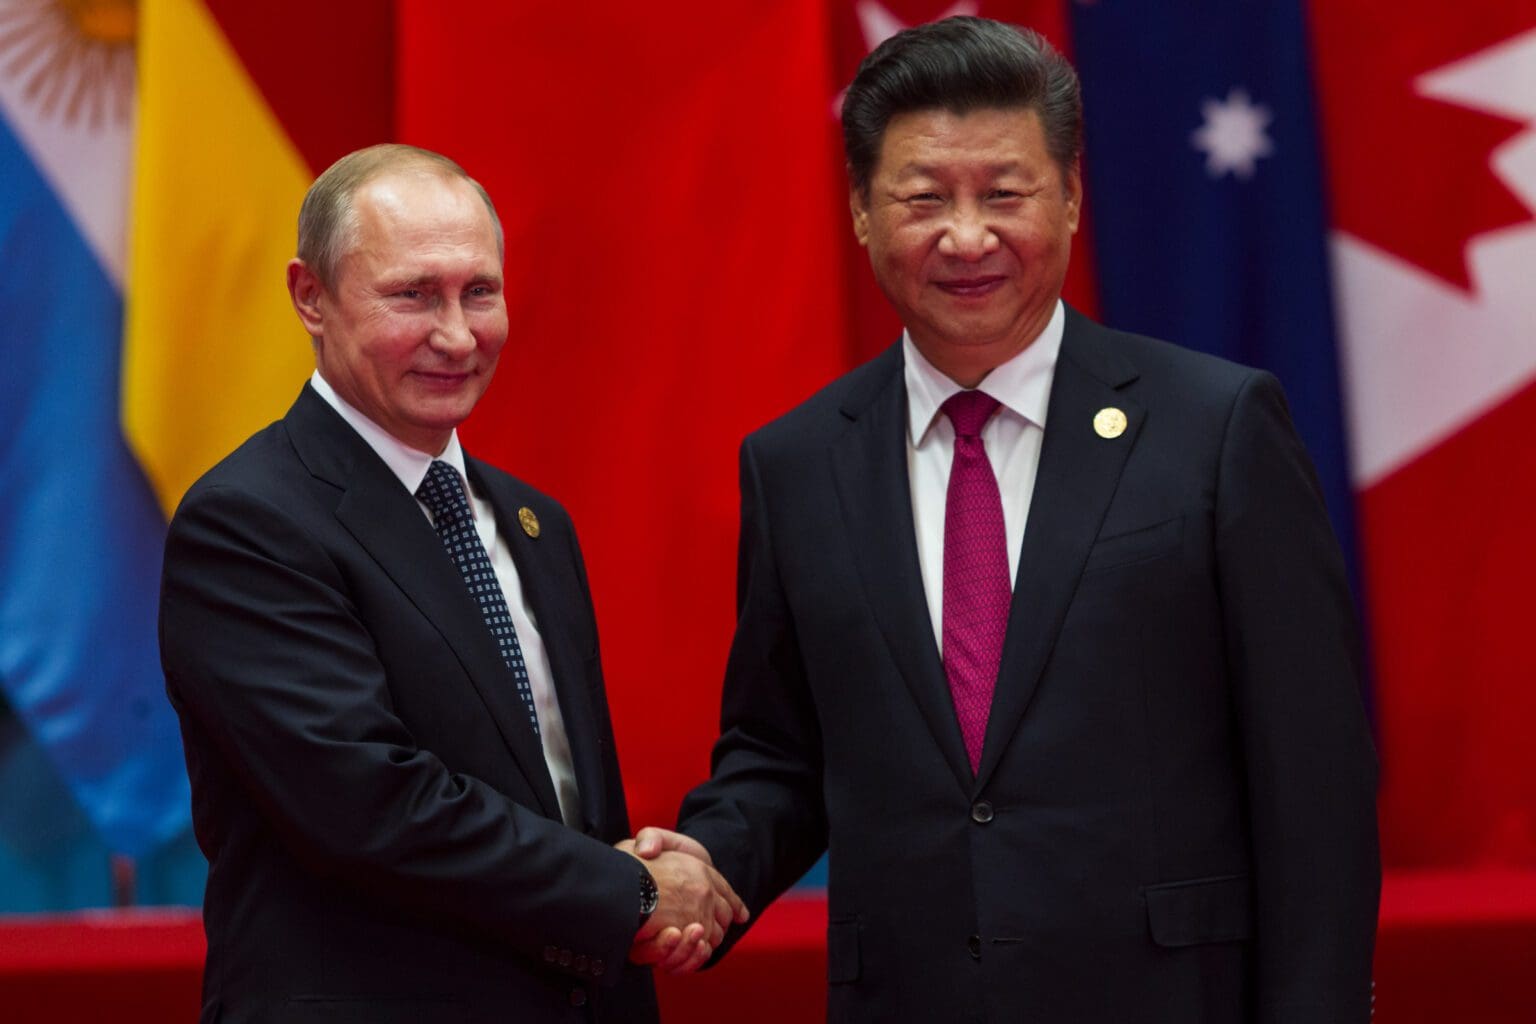 Xi Jinping Leaves China for the First Time in Two Years to Meet with Putin